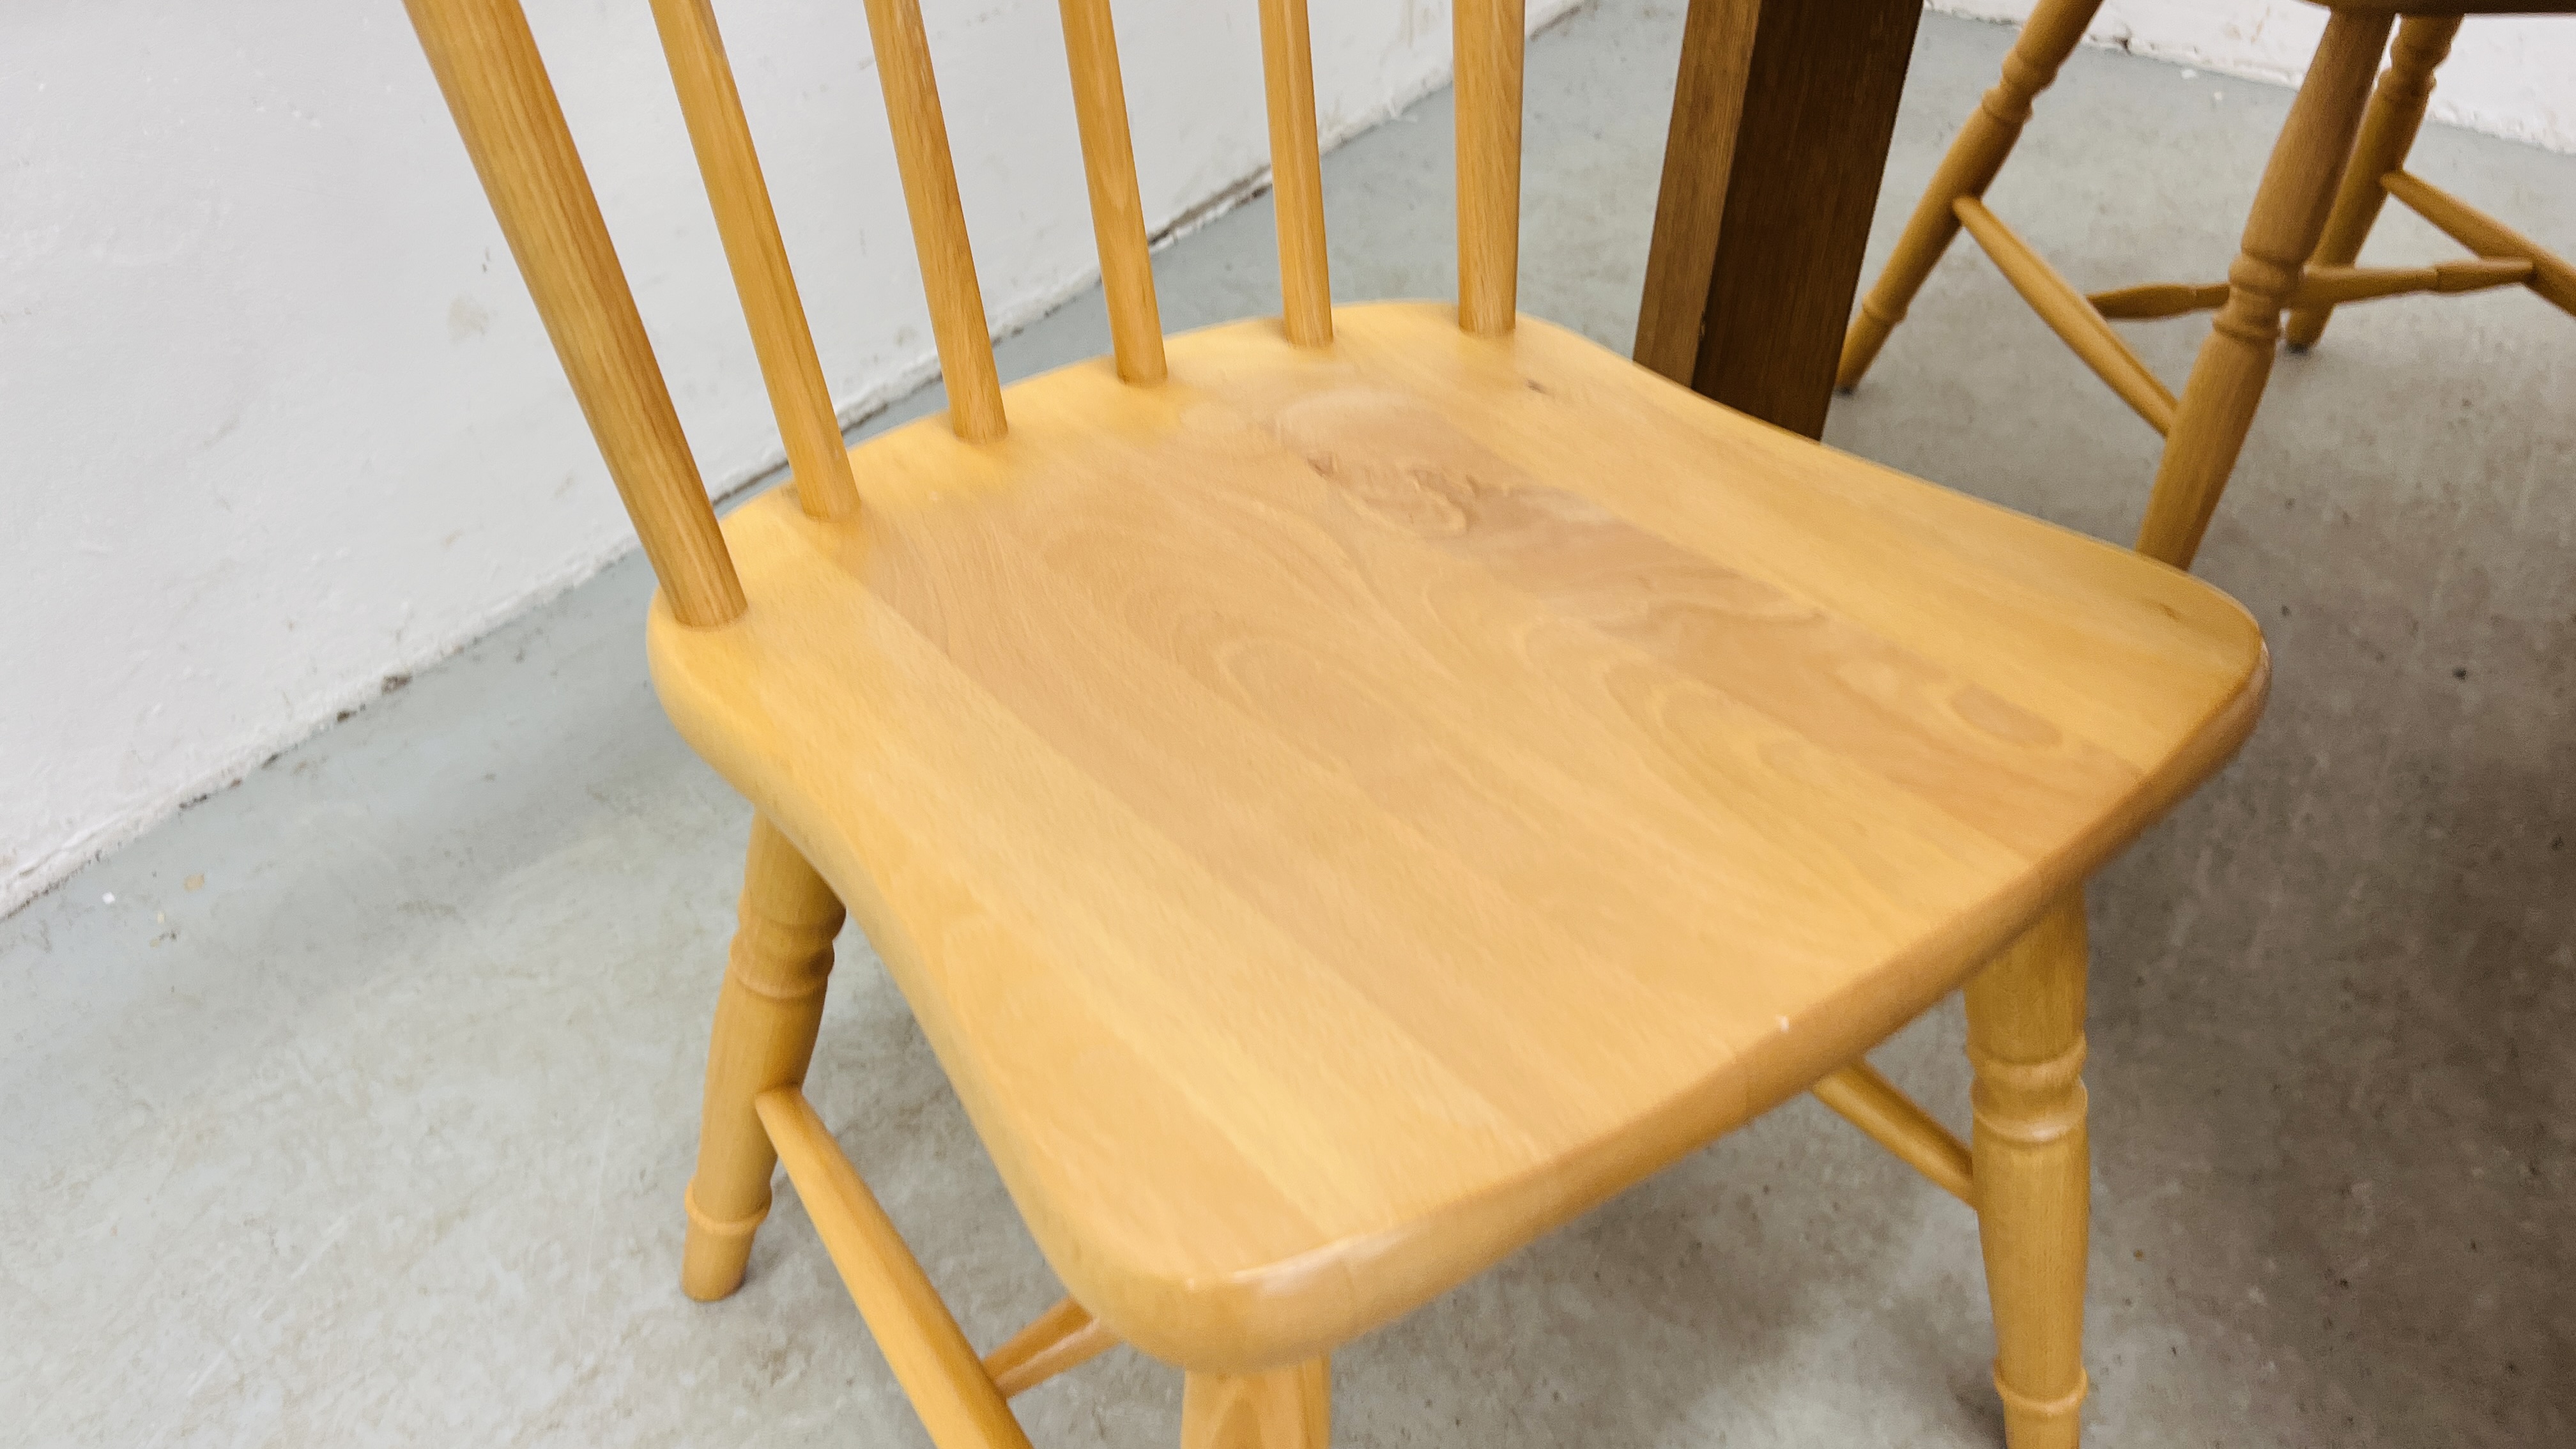 A SOLID OAK EXTENDING DINING TABLE ALONG WITH A SET OF FOUR BEECH WOOD DINING CHAIRS - Image 9 of 14